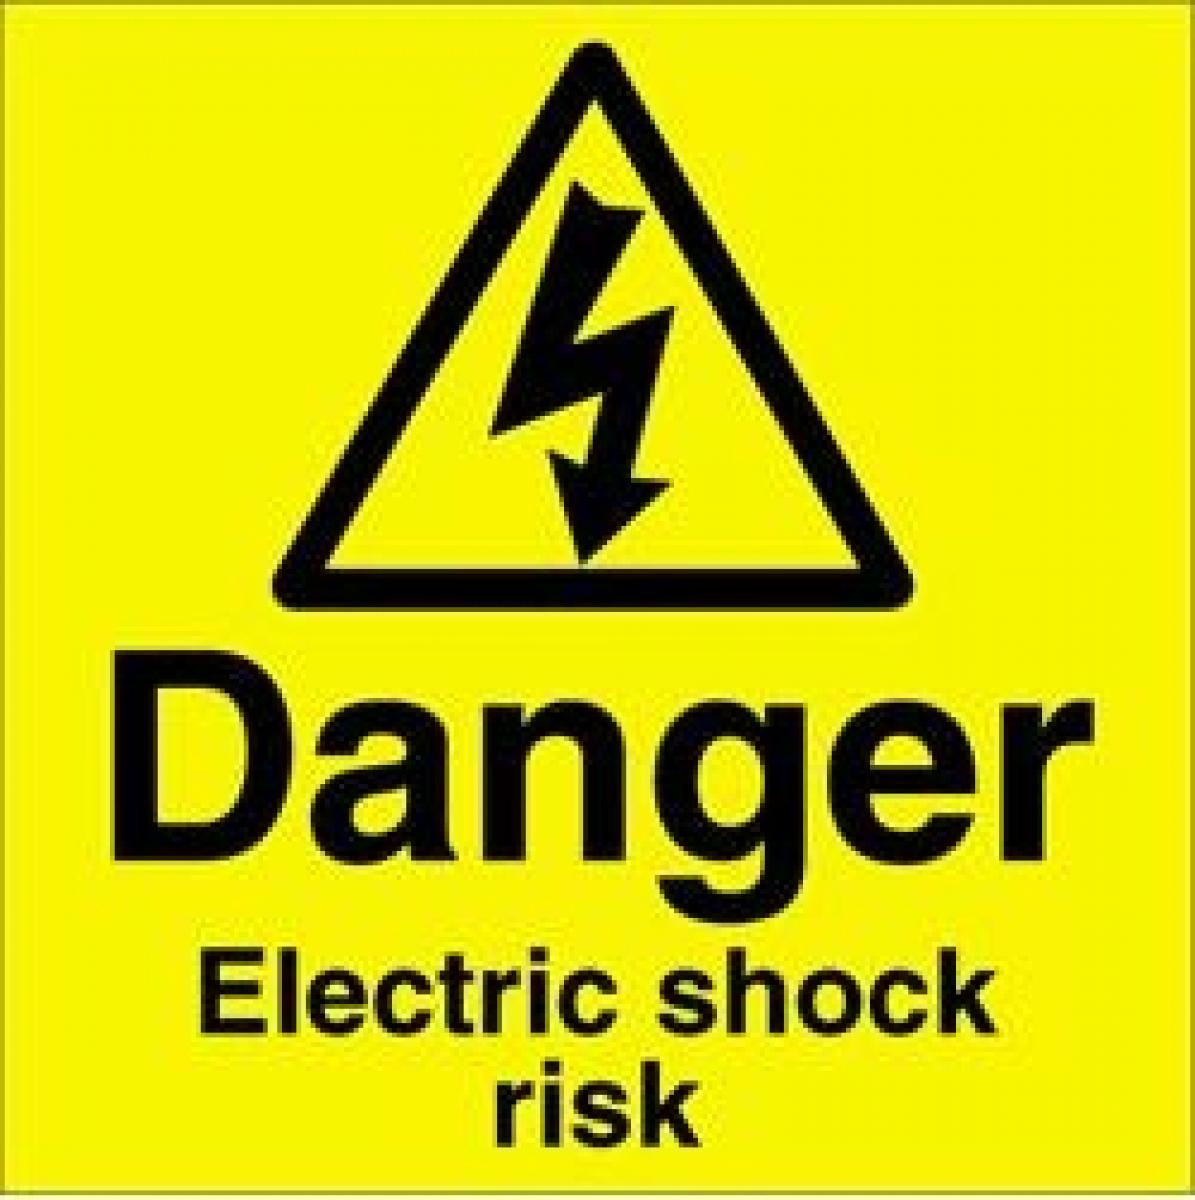 One person dies of electric shock